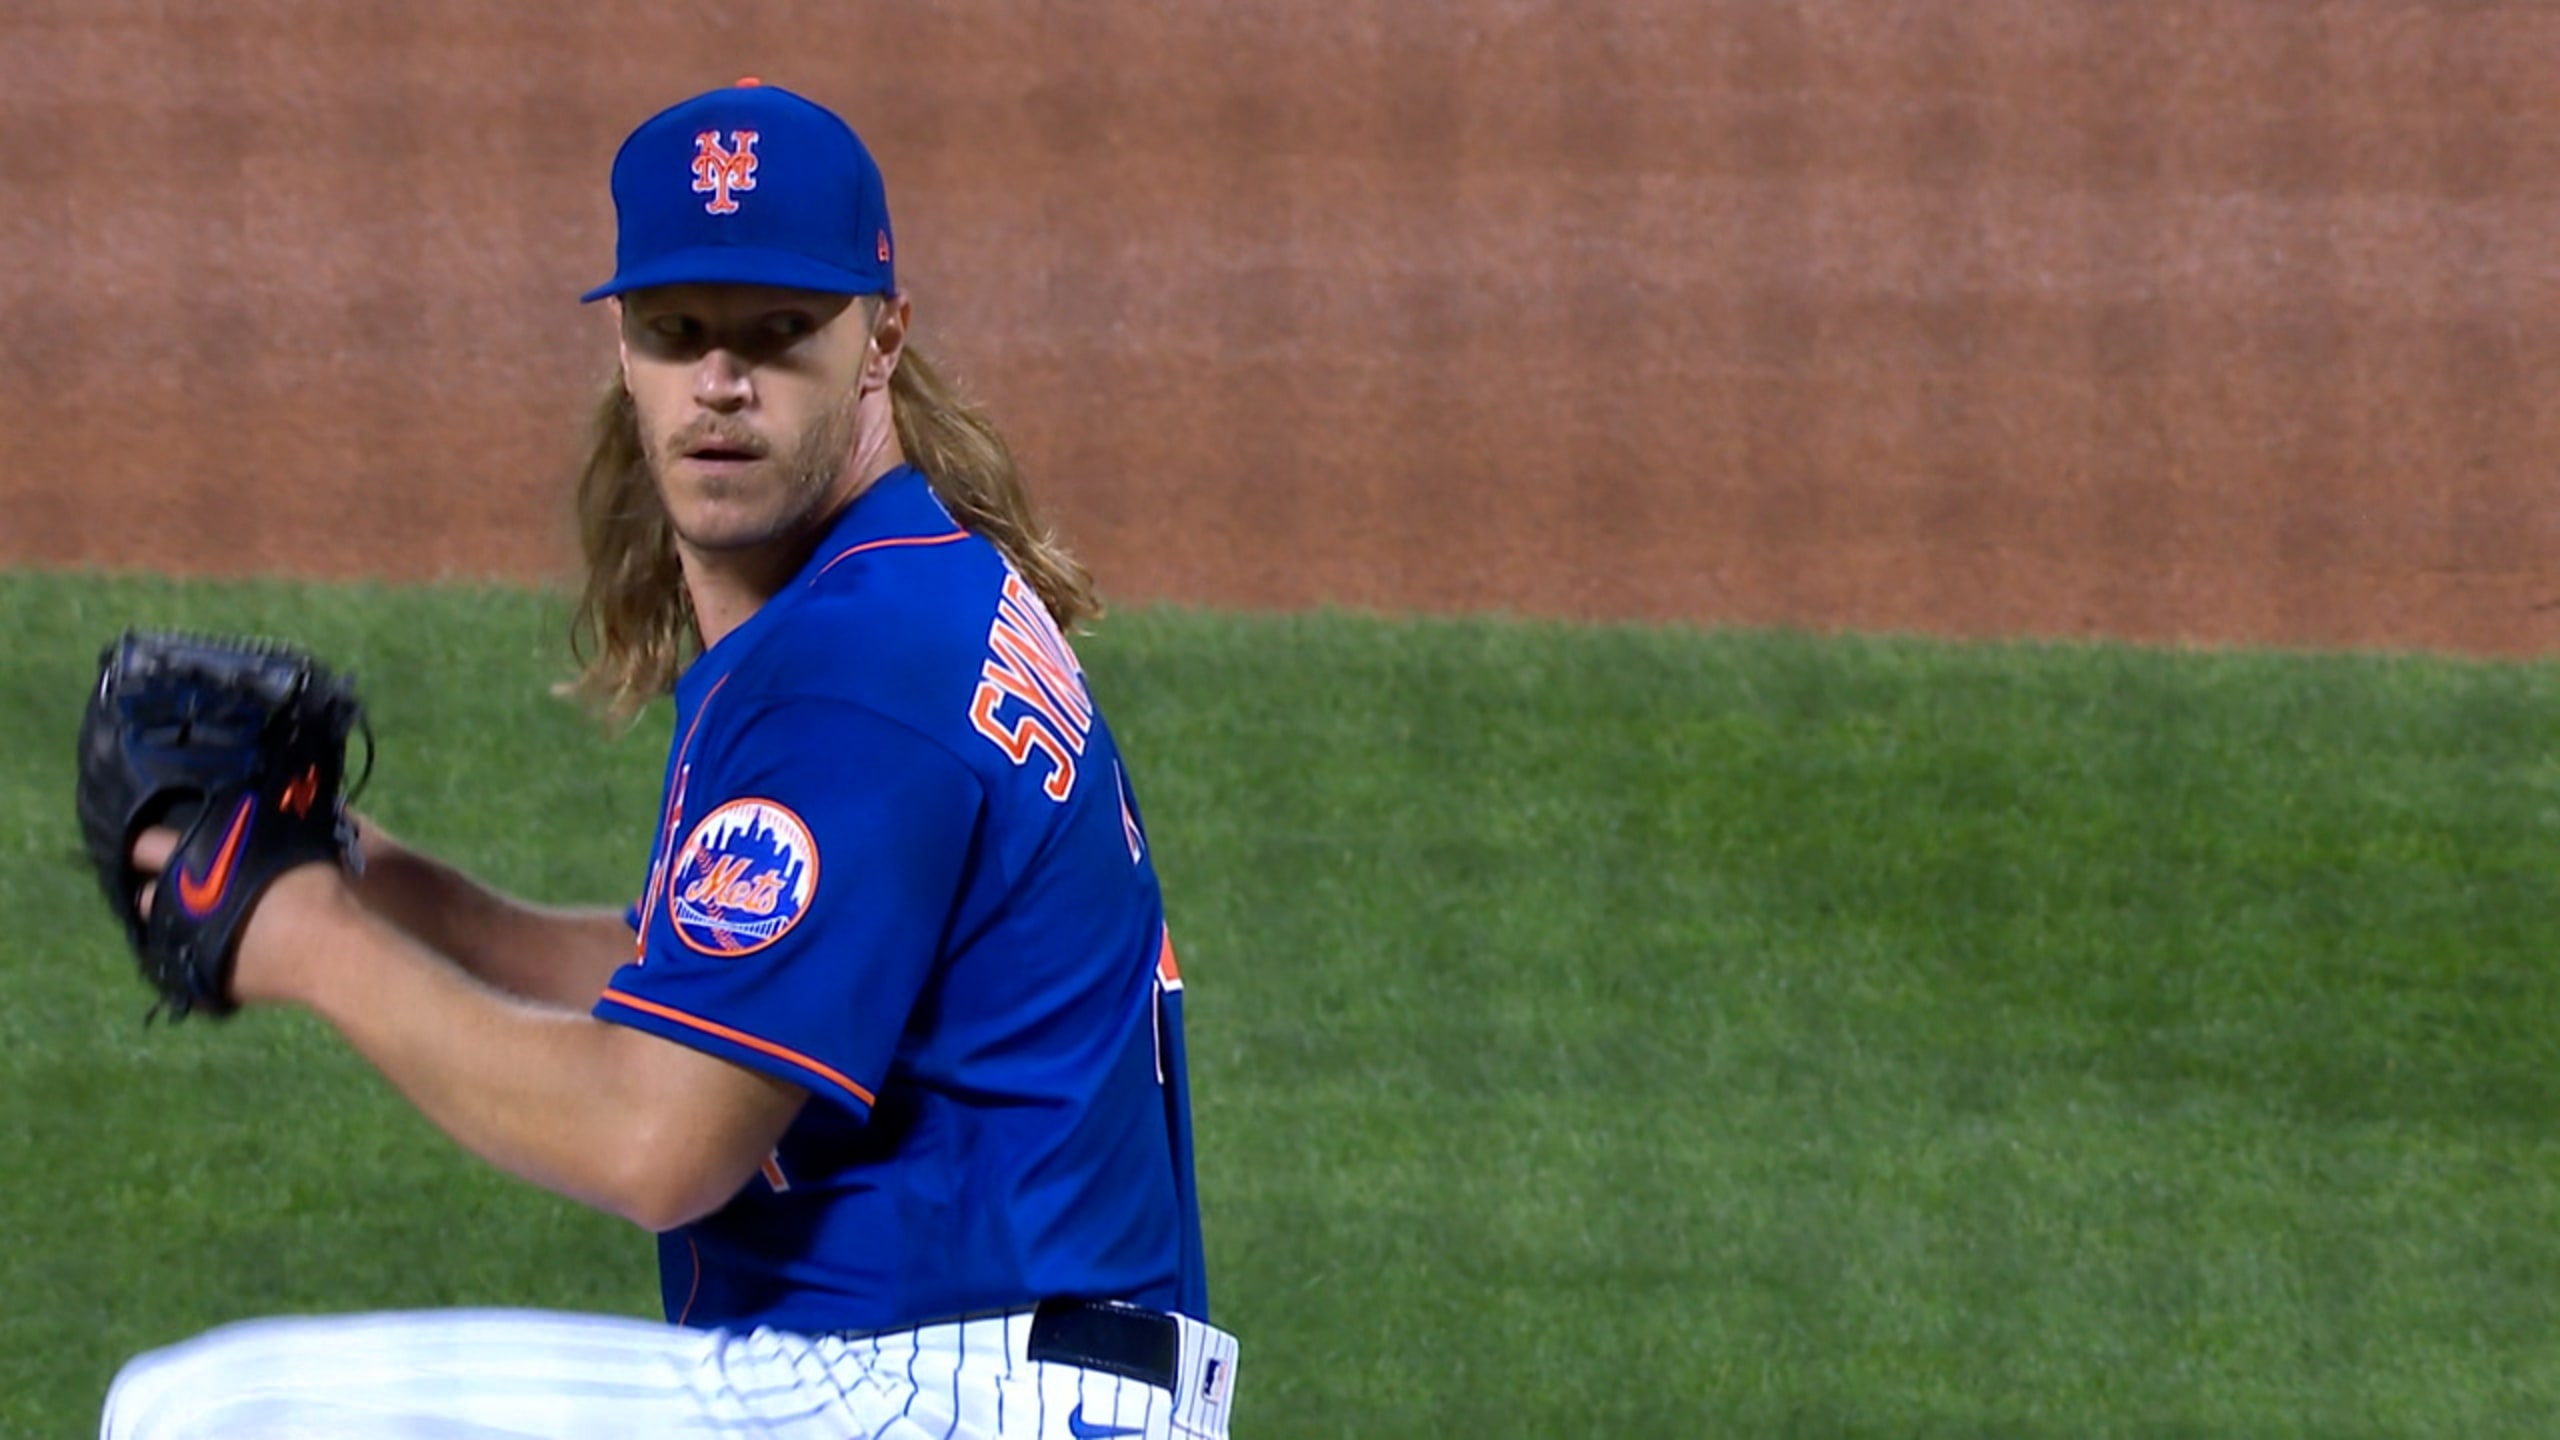 Noah Syndergaard designated for assignment by Guardians after